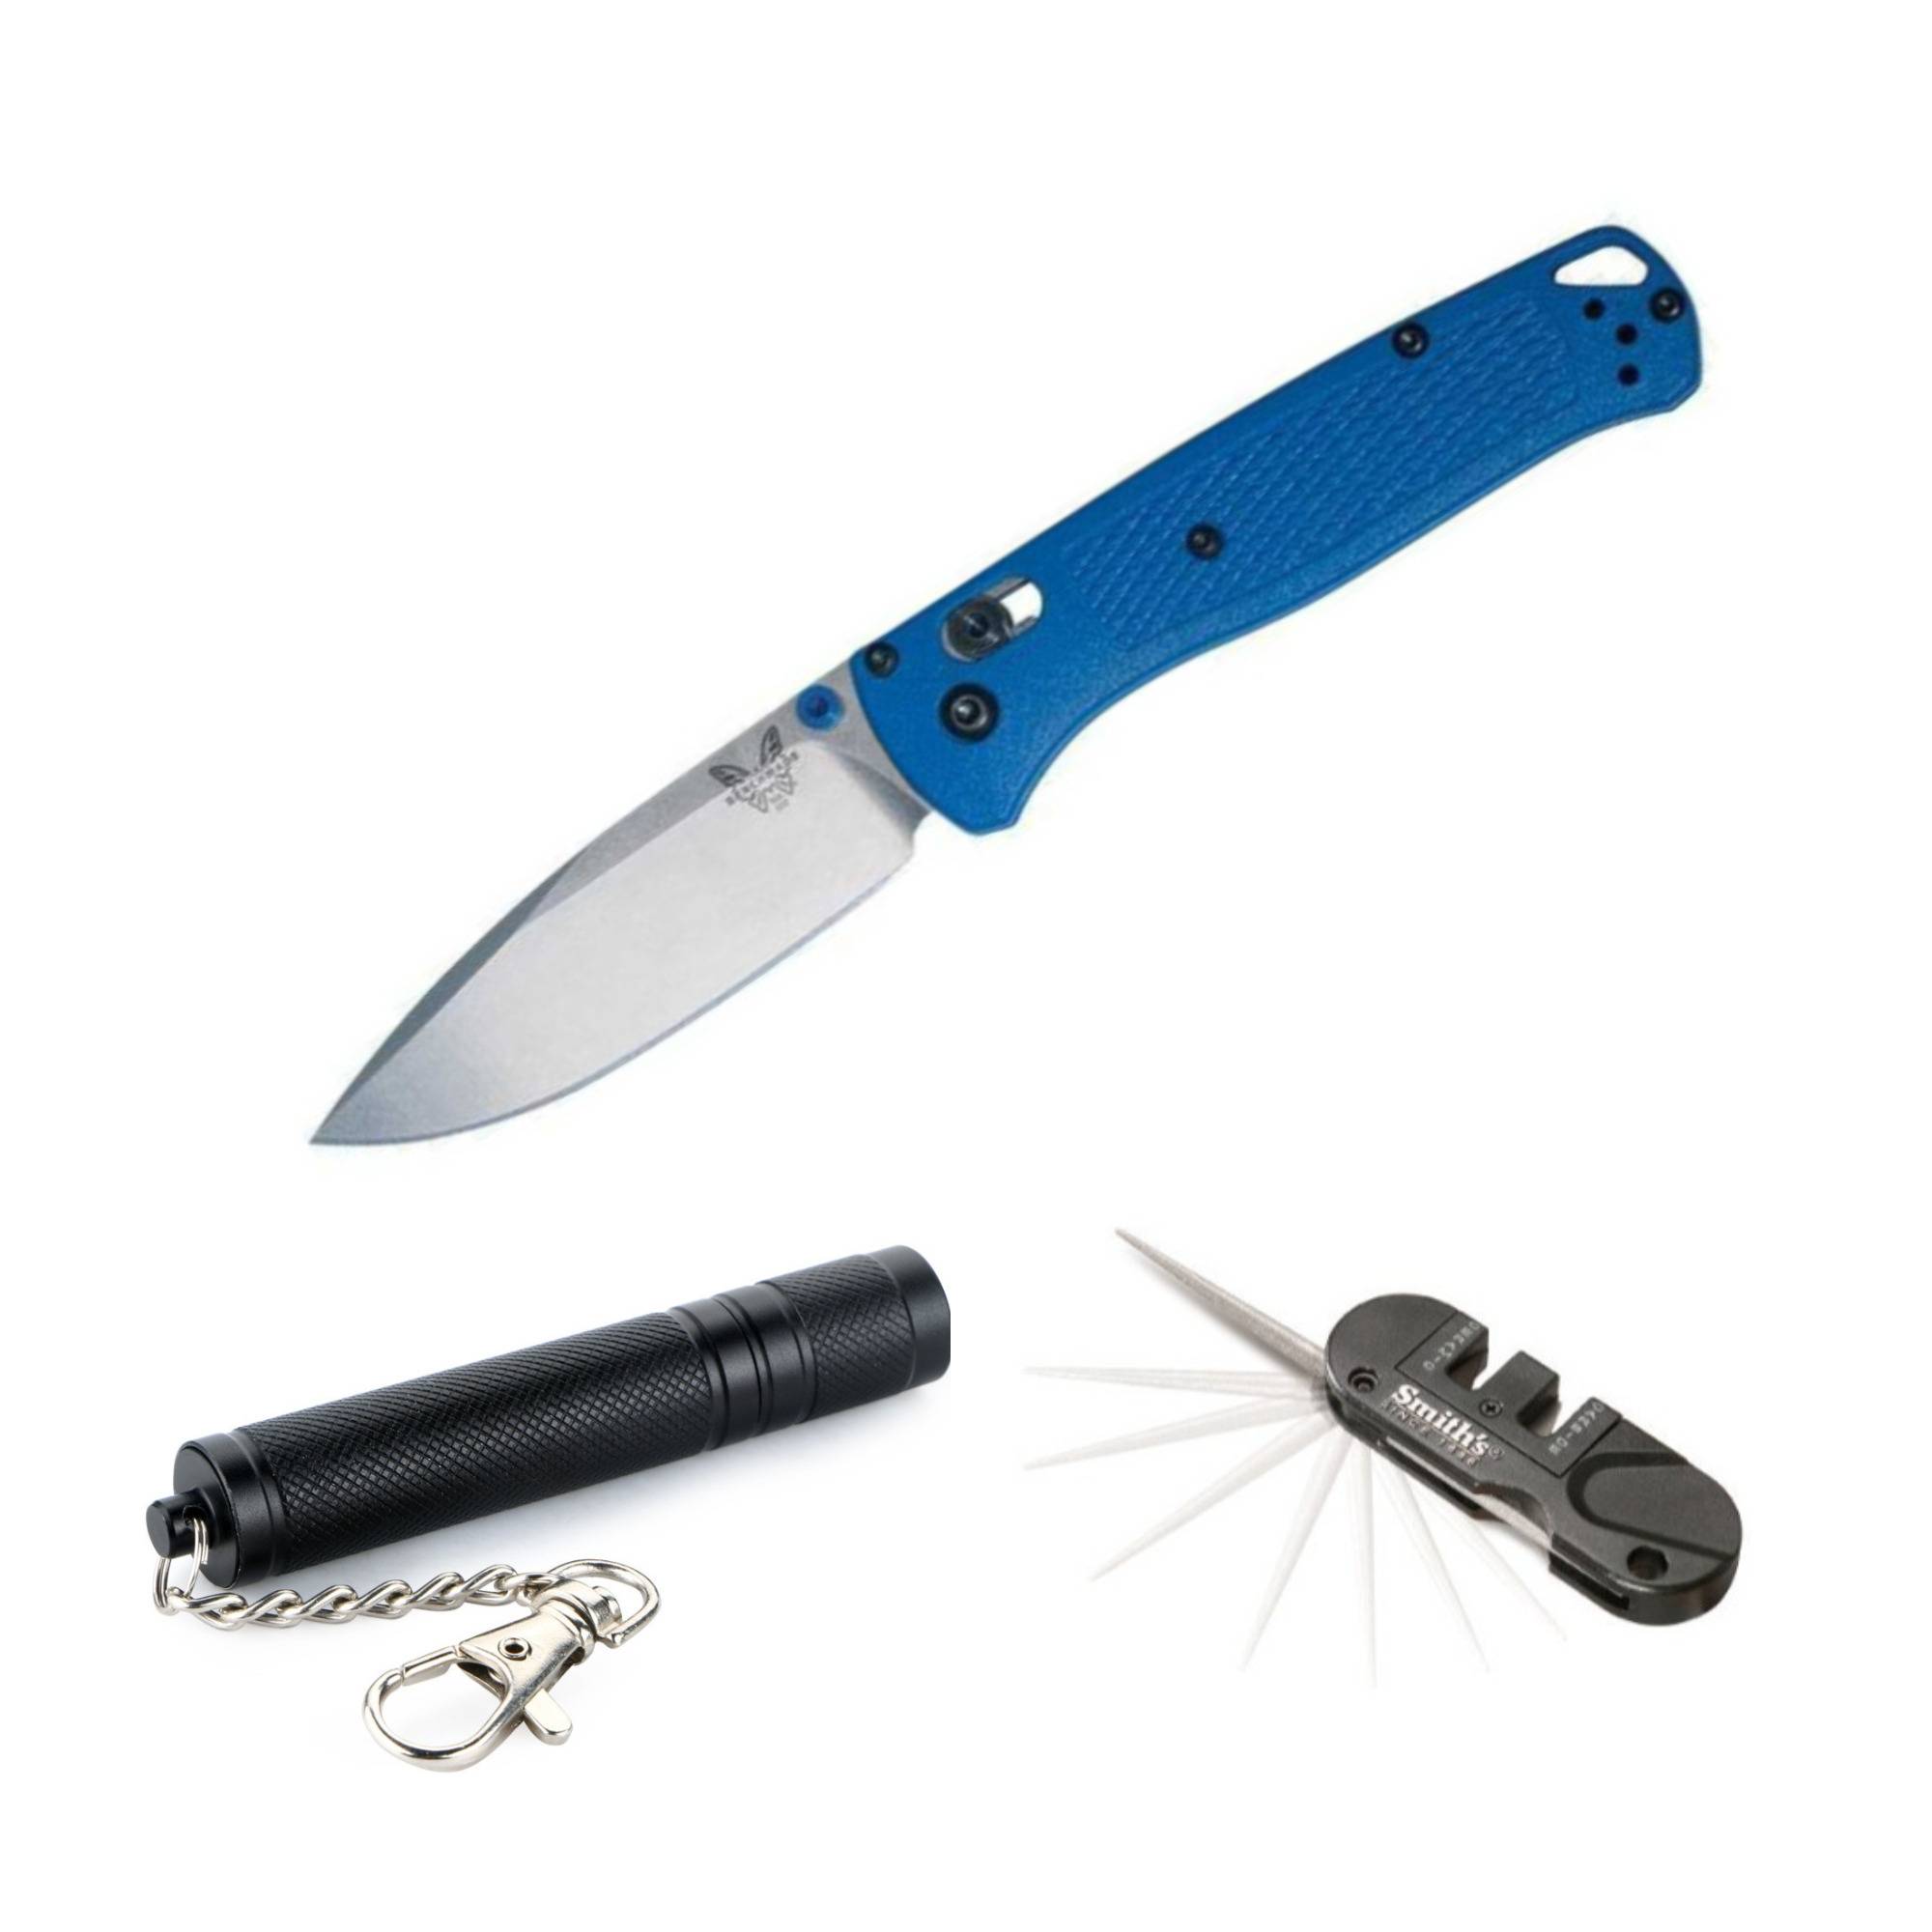 Benchmade 535 Bugout Manual Folding Knife with Plain Drop-Point Blade with Sharpener and Flashlight